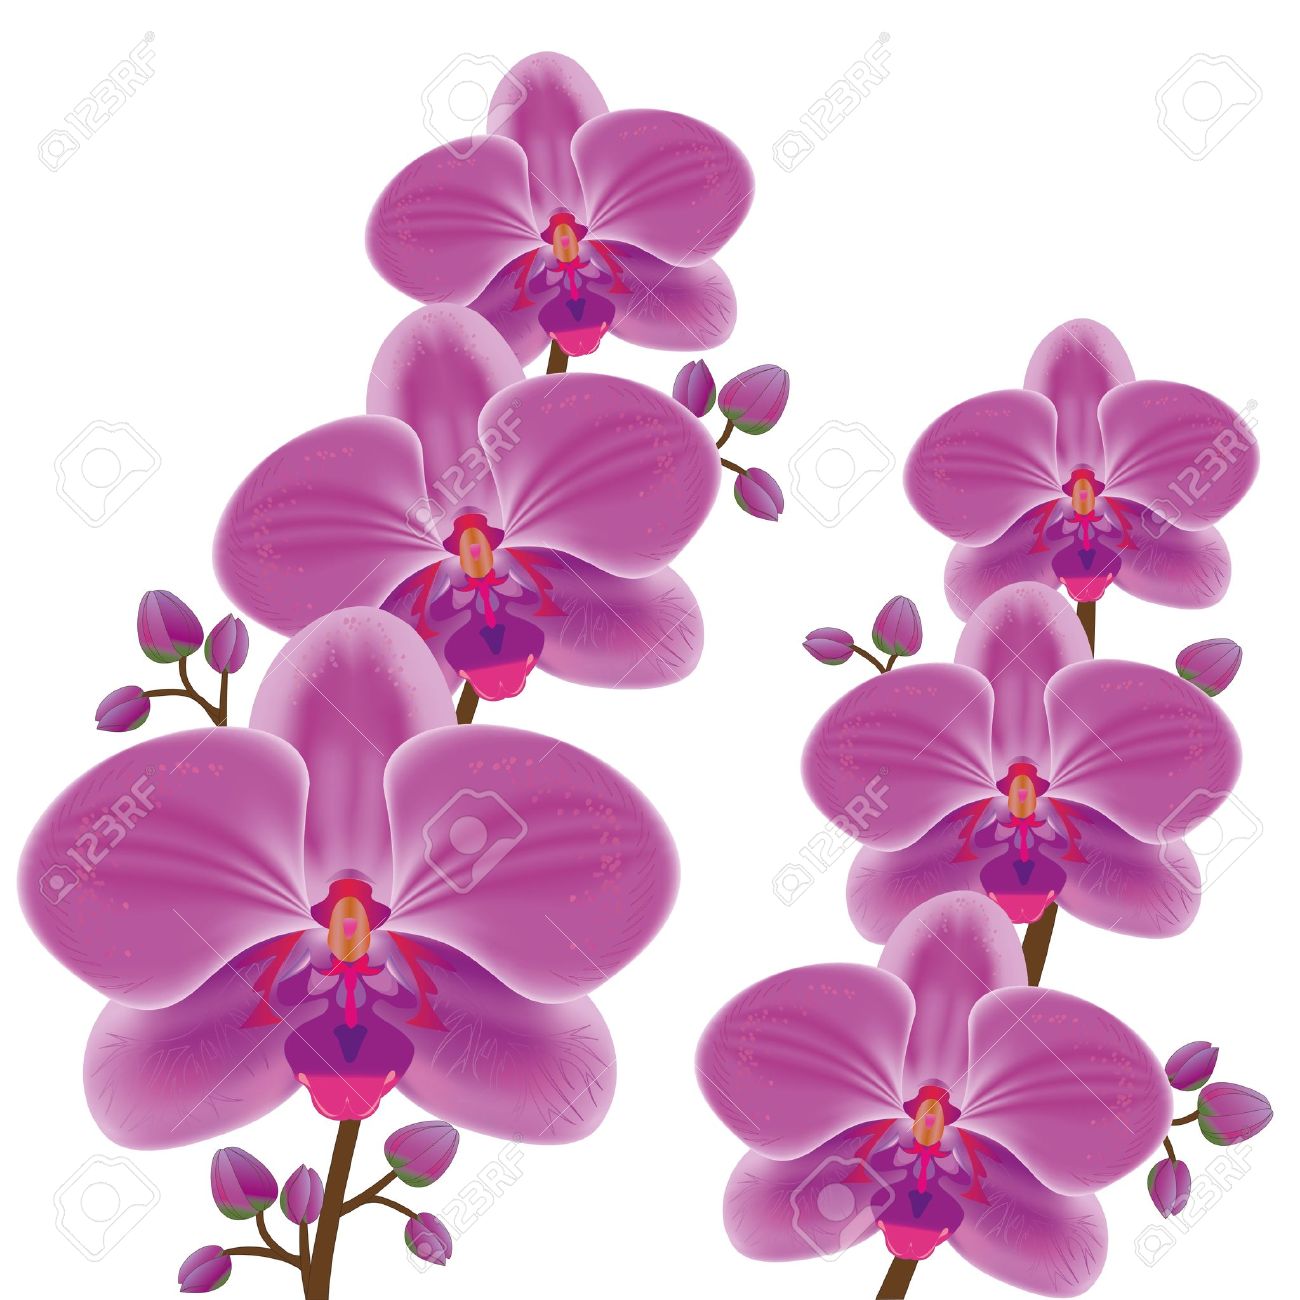 orchid flower clip art free - photo #7